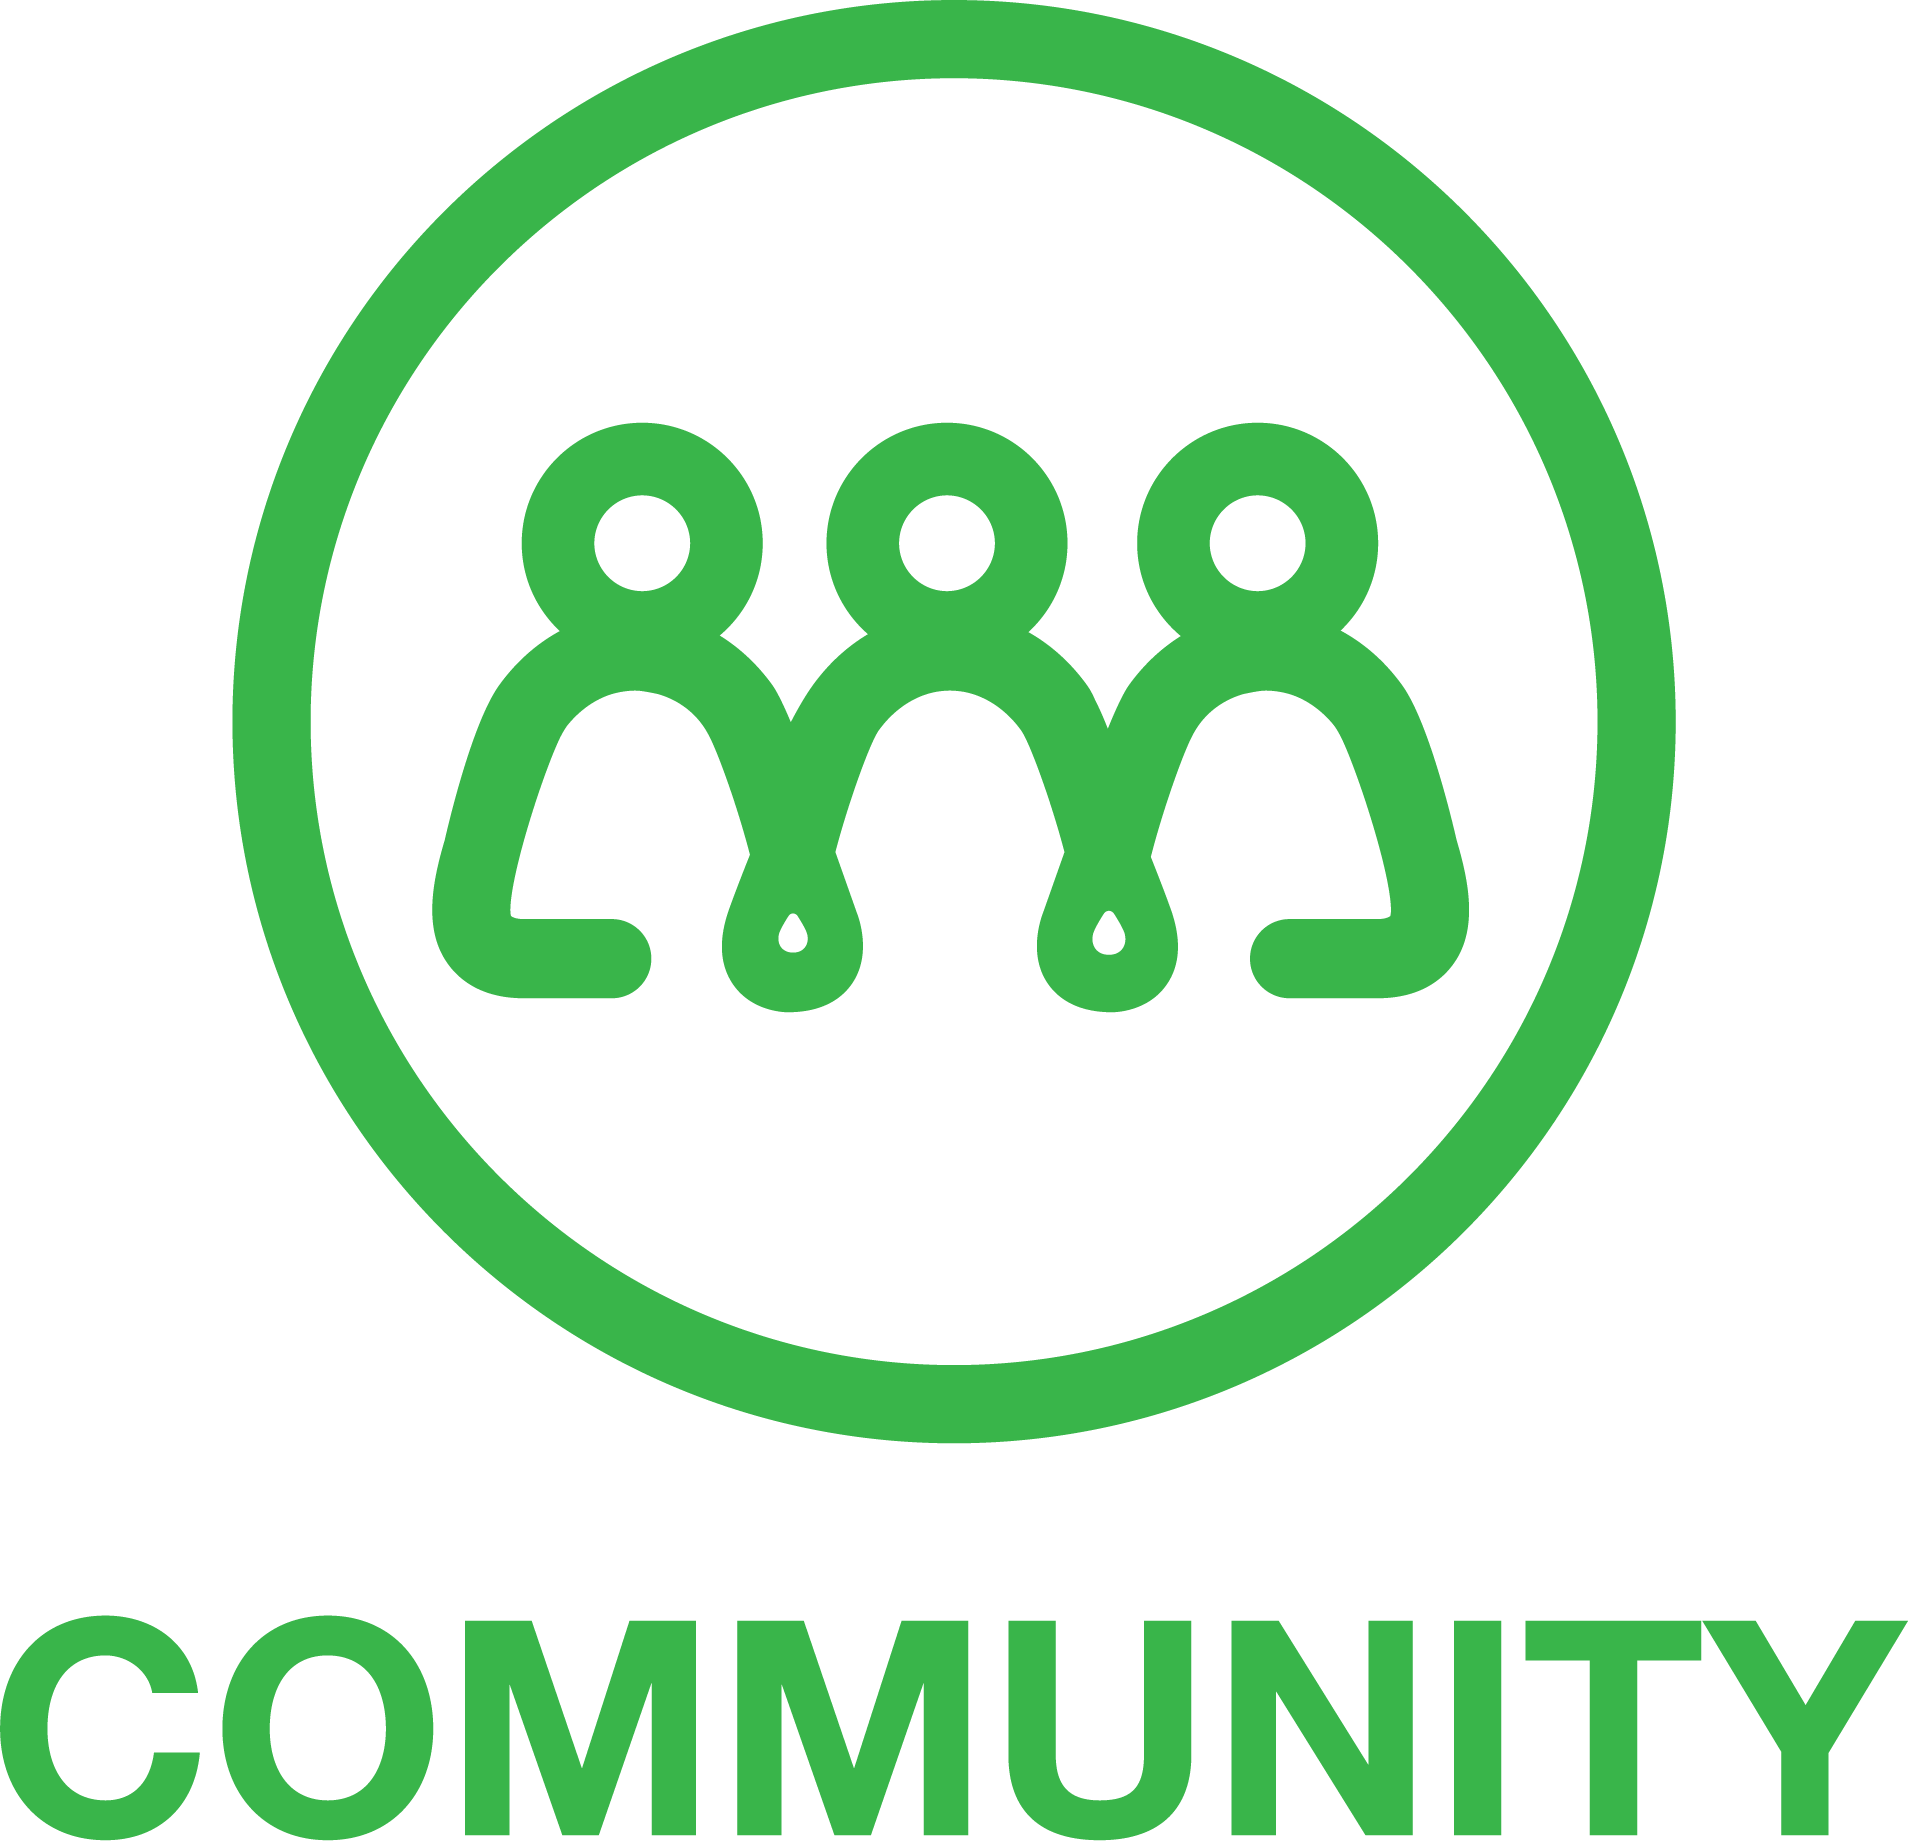 A green logo with the word community in it.